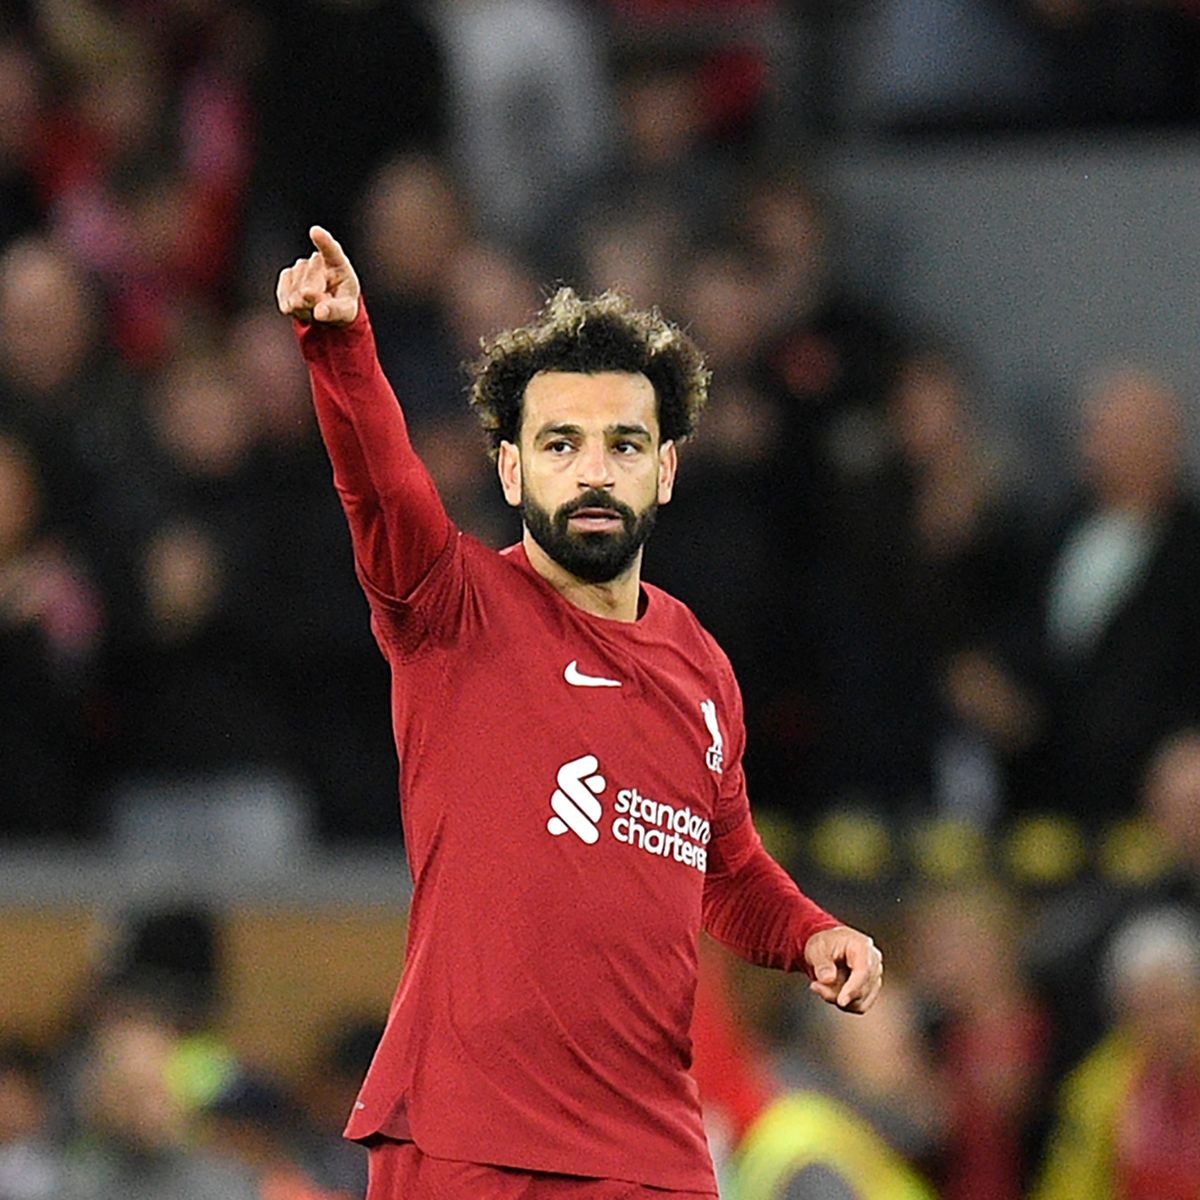 Mohamed Salah playing for liverpool